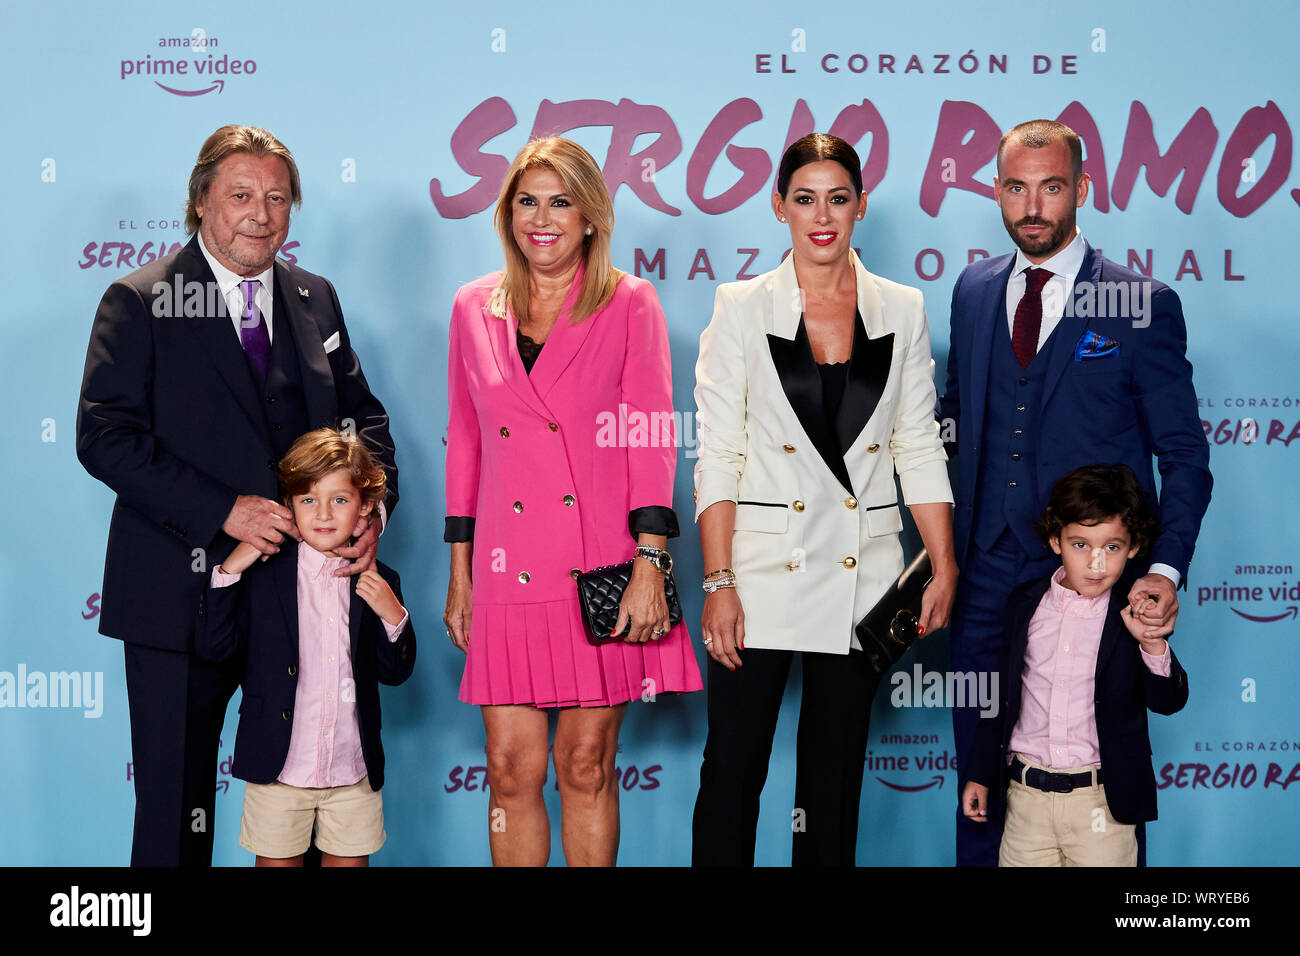 Madrid, Spain. 10th Sep, 2019. Paqui Ramos, Jose Maria Ramos and Miriam Ramos attend the El Corazon De Sergio Ramos premiere at Reina Sofia Museum in Madrid. Credit: SOPA Images Limited/Alamy Live News Stock Photo